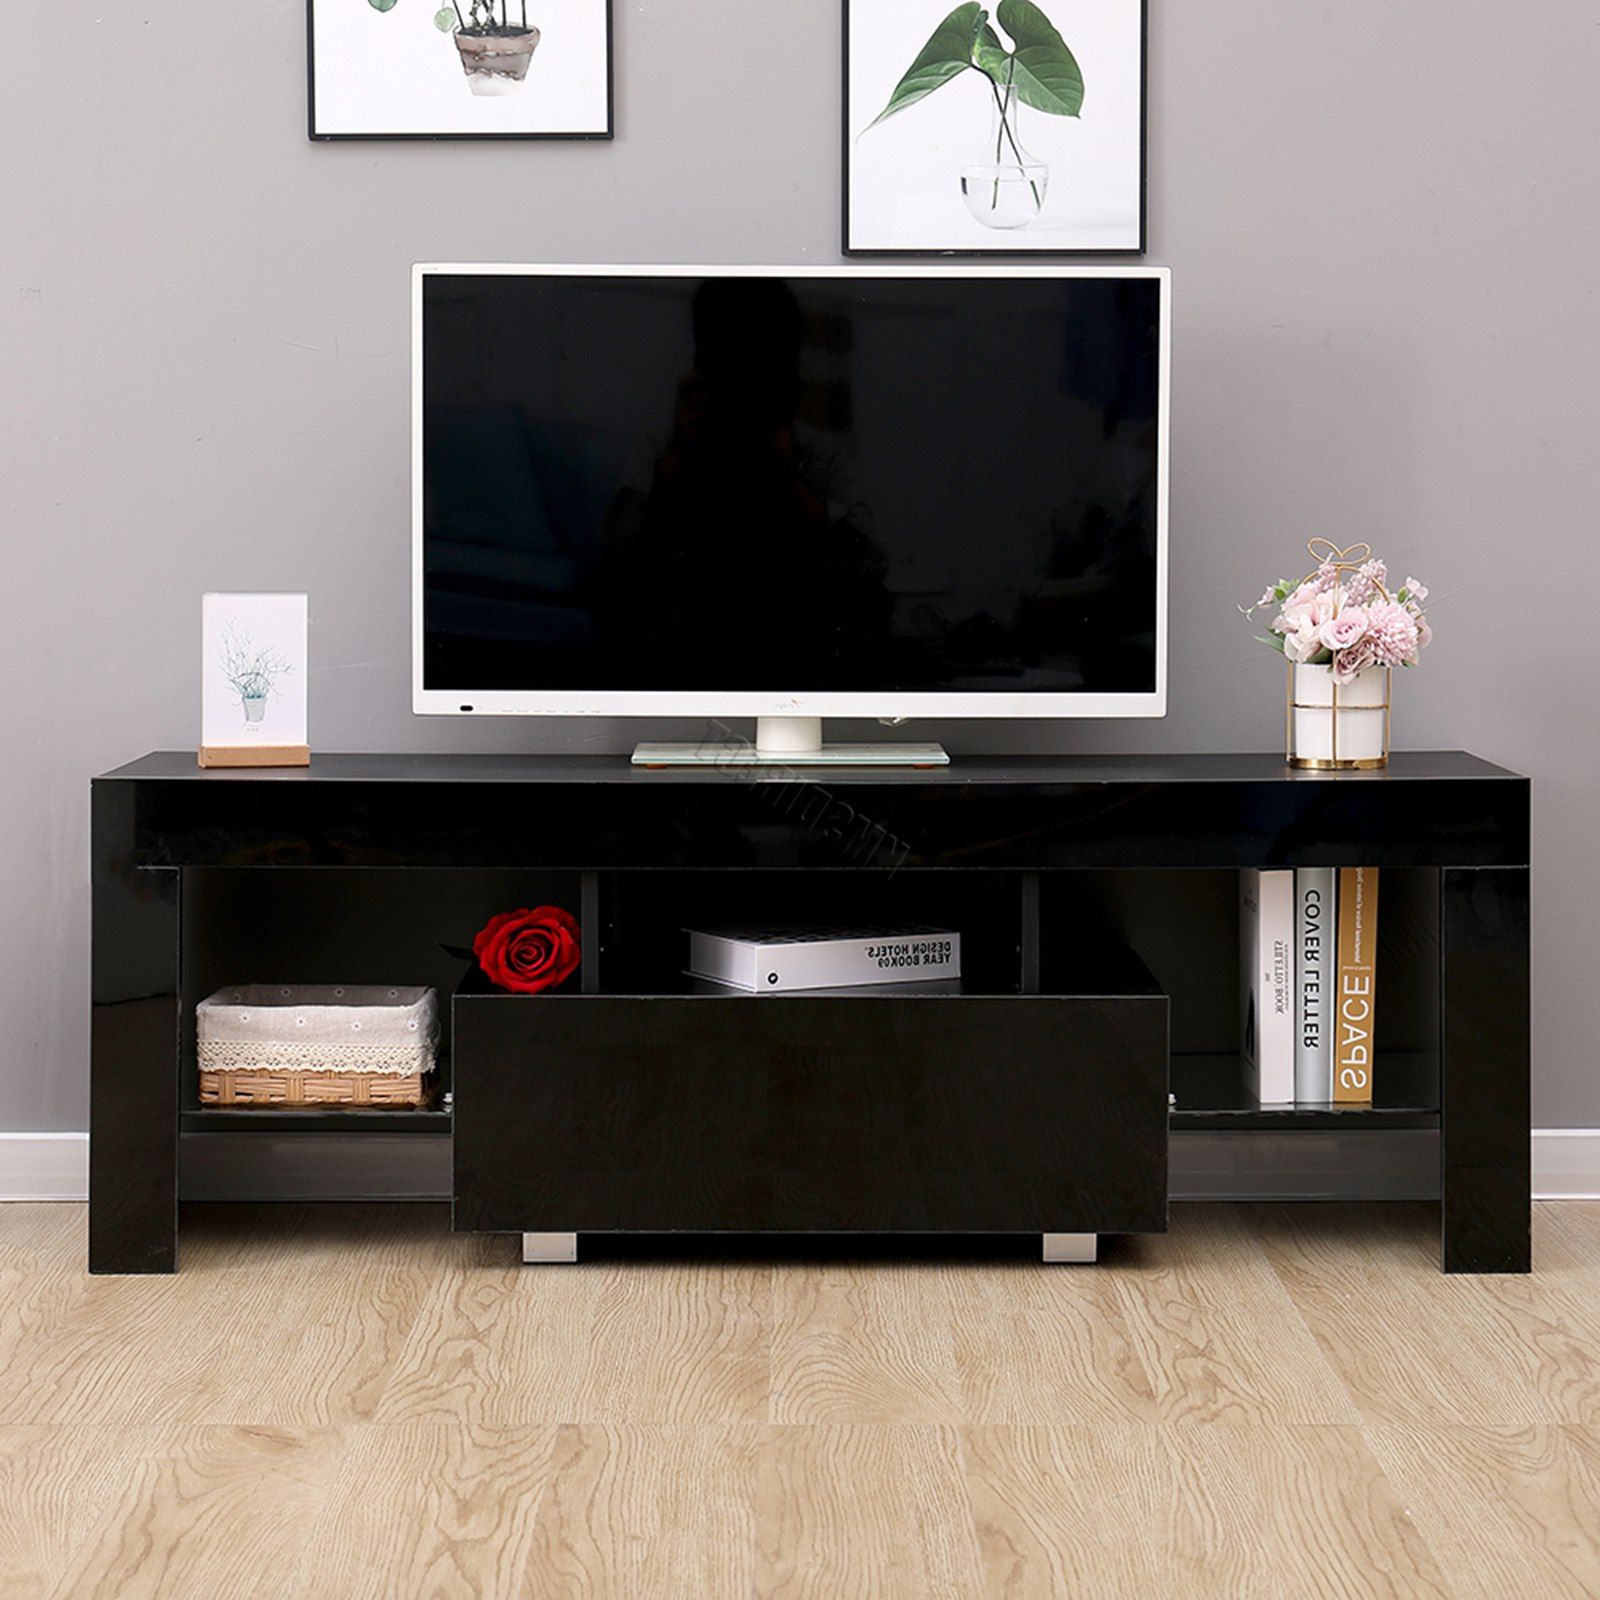 Westwood Morden High Gloss Matt 130cm Tv Cabinet Unit For Zimtown Tv Stands With High Gloss Led Lights (Gallery 20 of 20)